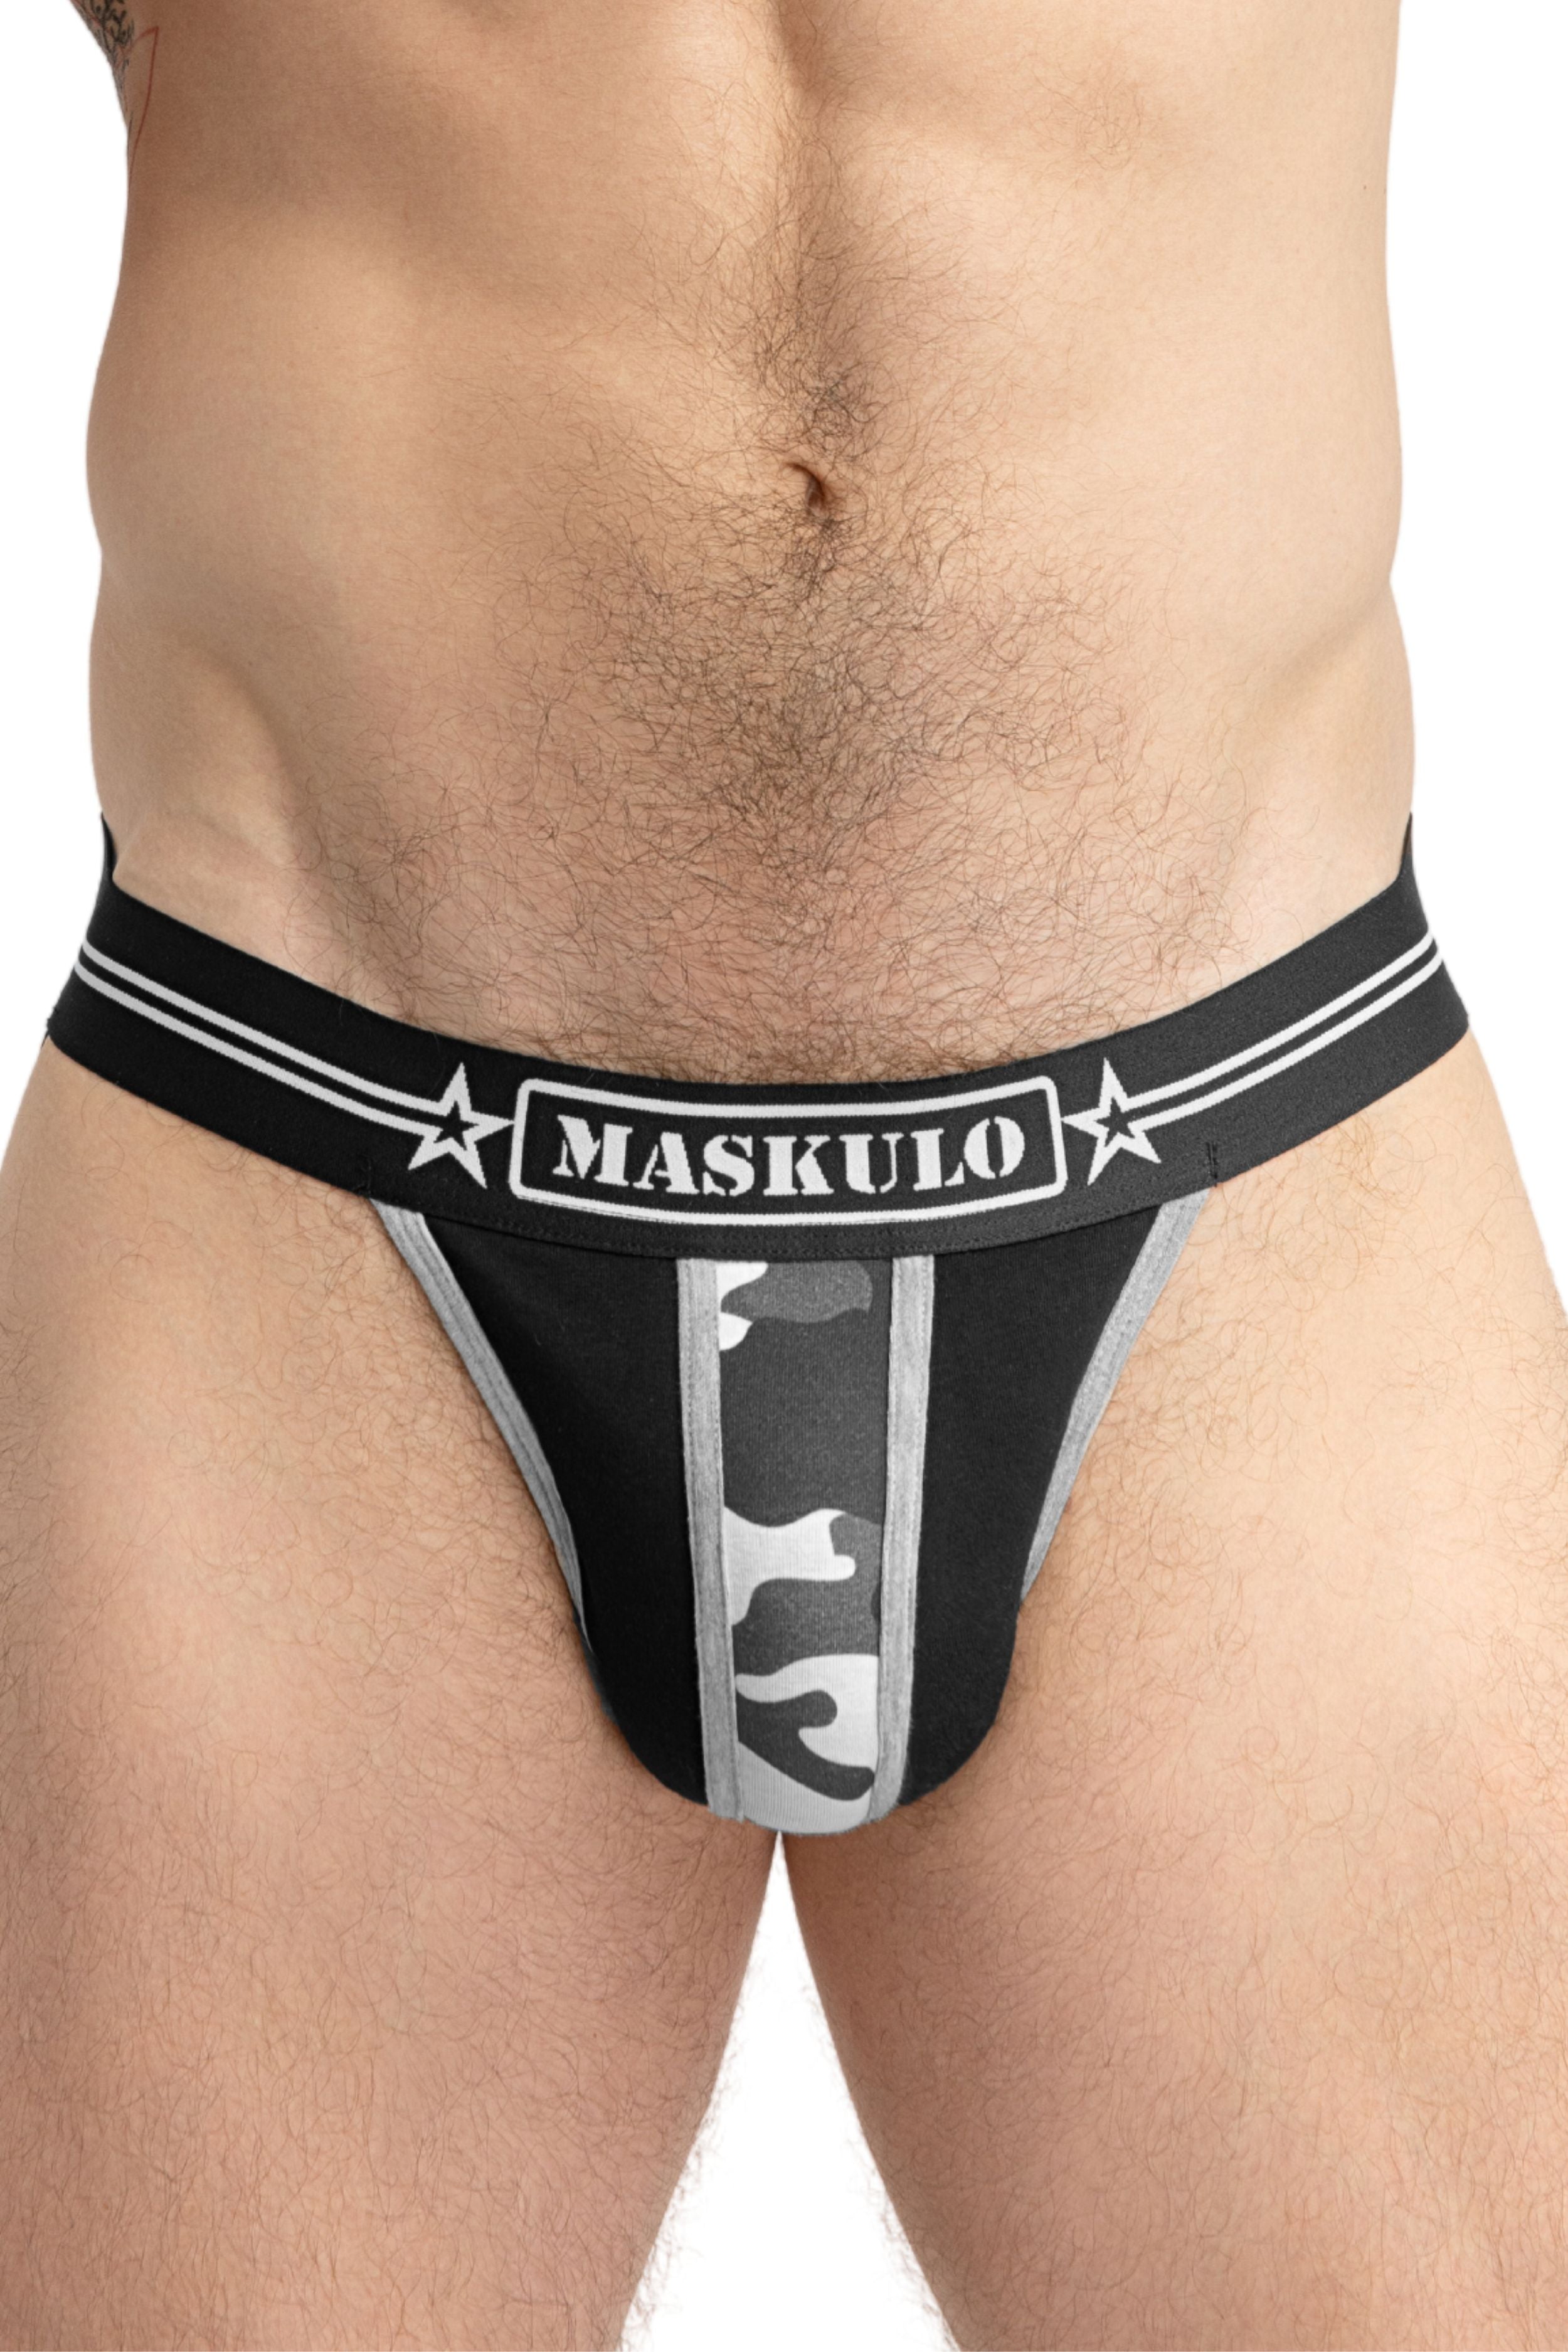 Military Jock with Lifter. Black